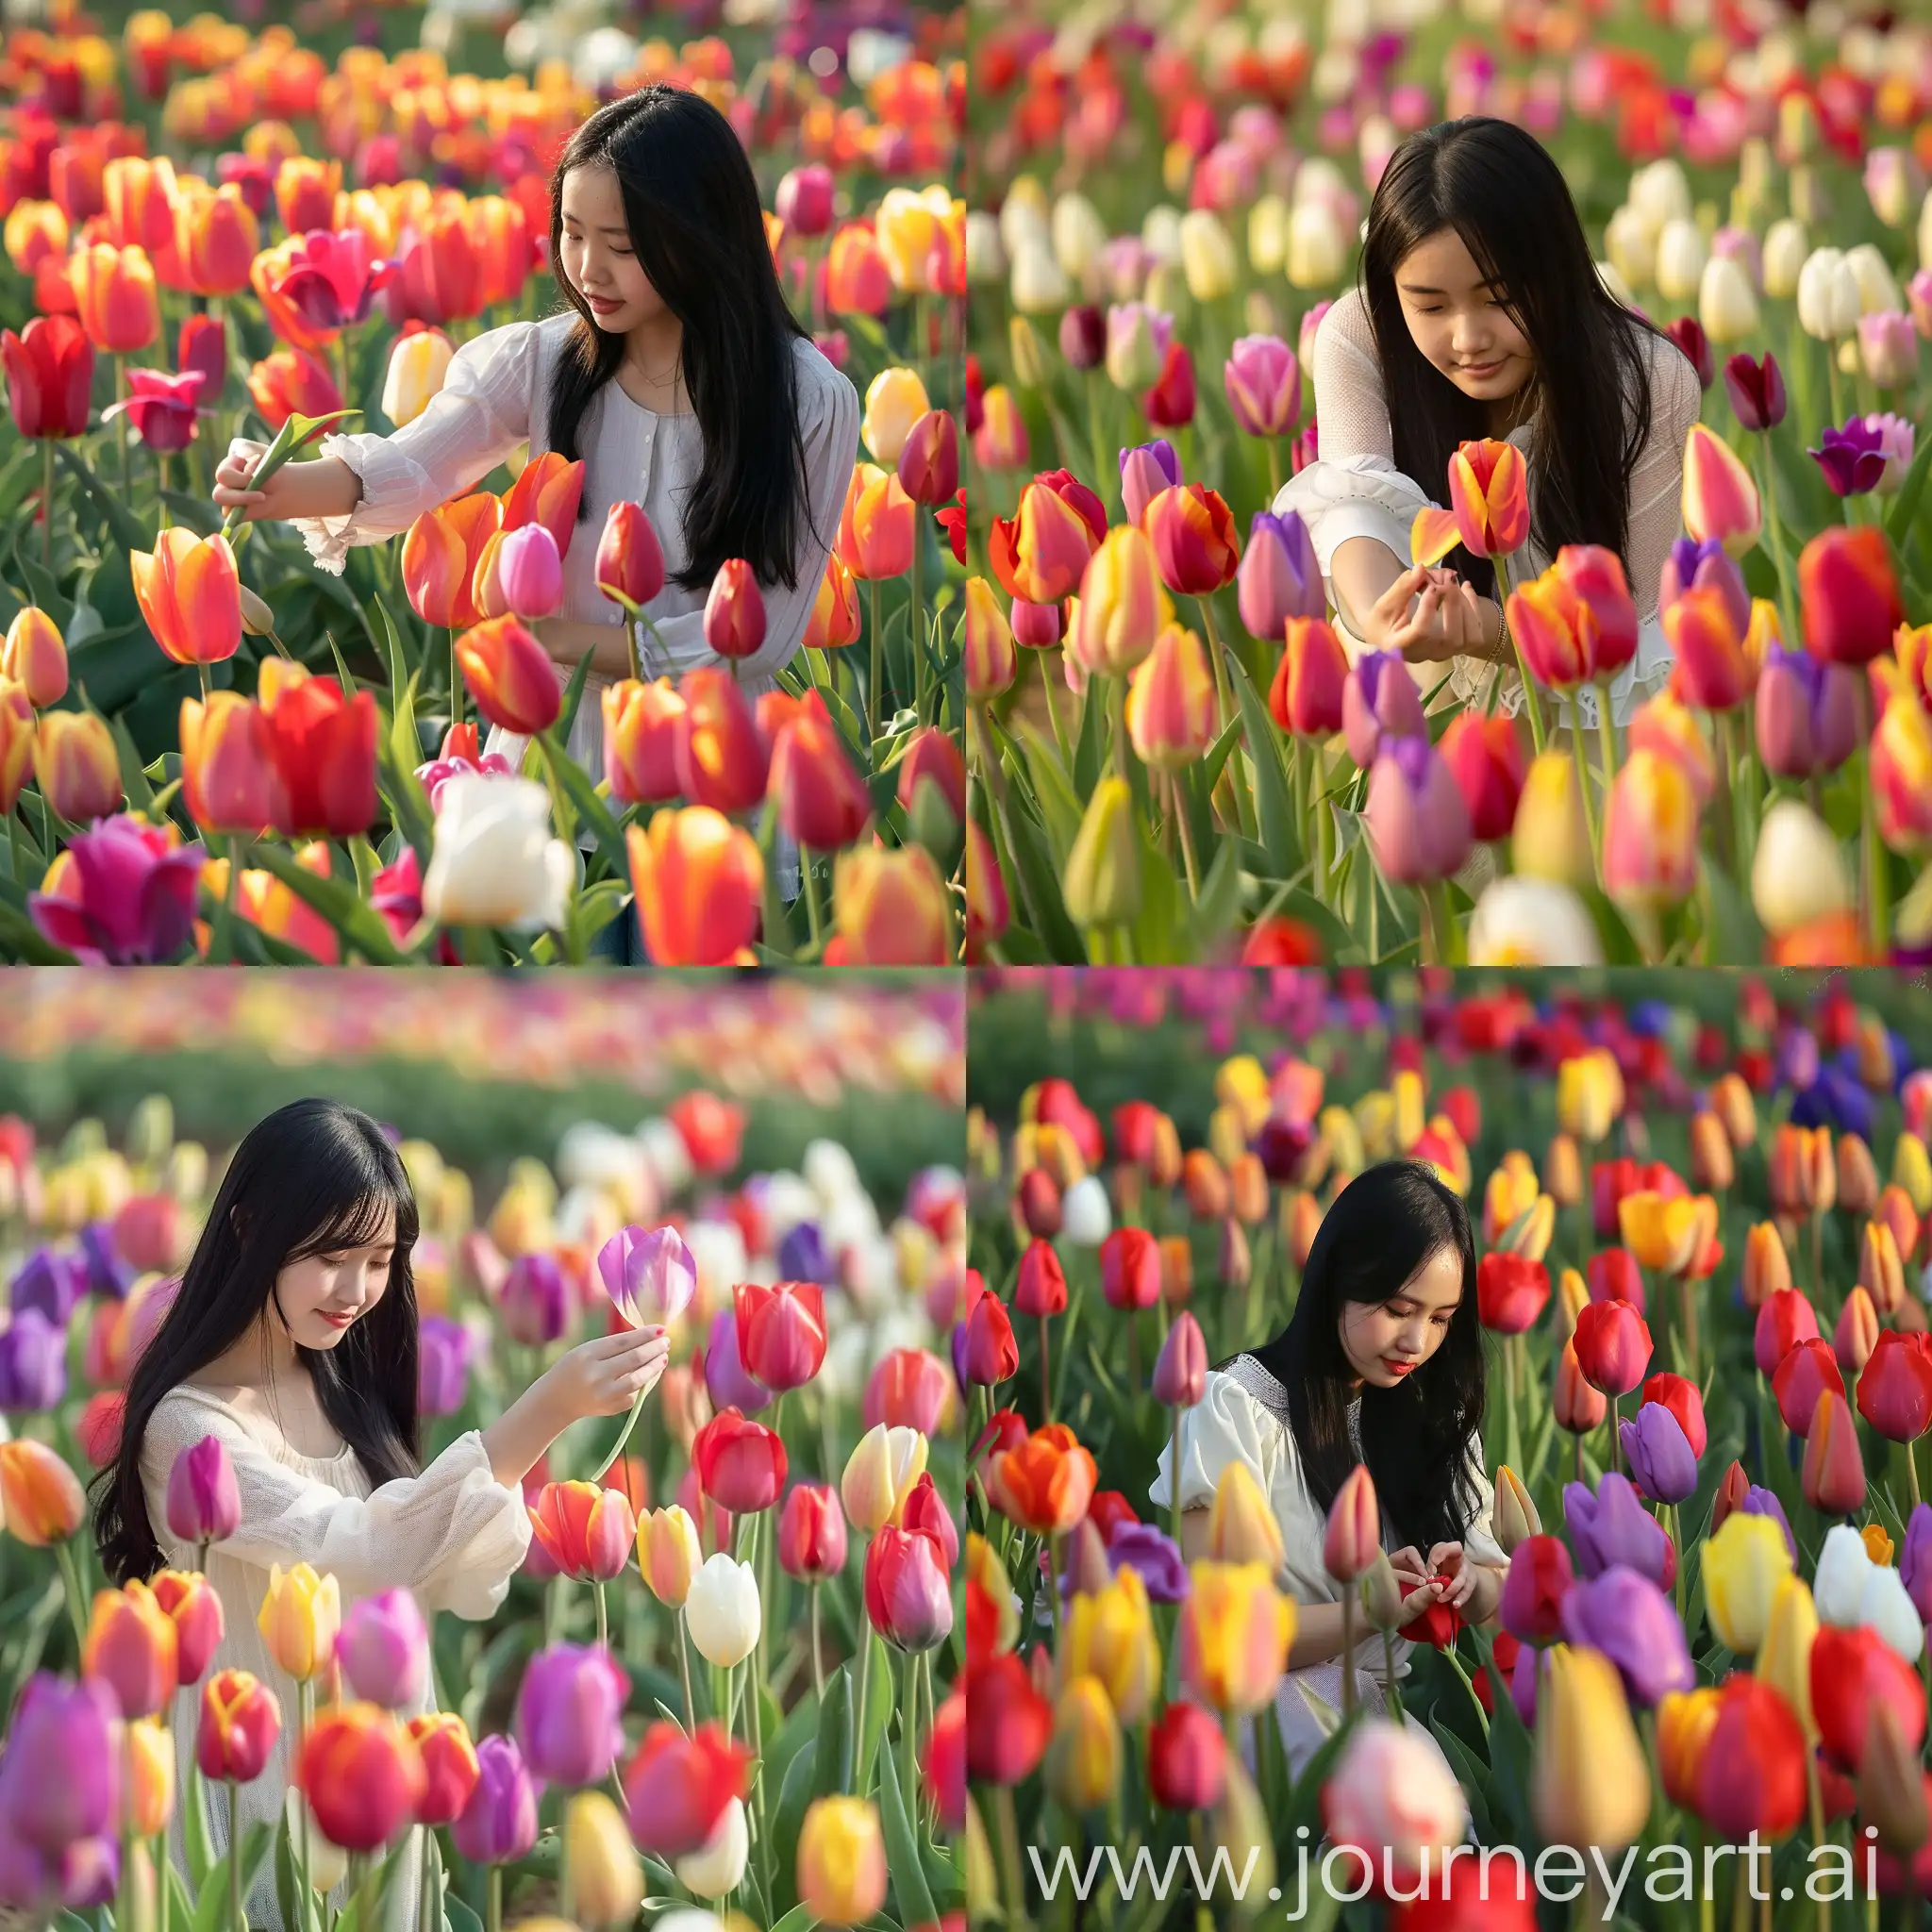 a field of colorful tulips, a lone girl in the midst of it, she is a 18 years old Indonesian, she has a long black hair, wearing a thin white blouse, she is trying to pluck one of the tulips, with warm expression, sunny day